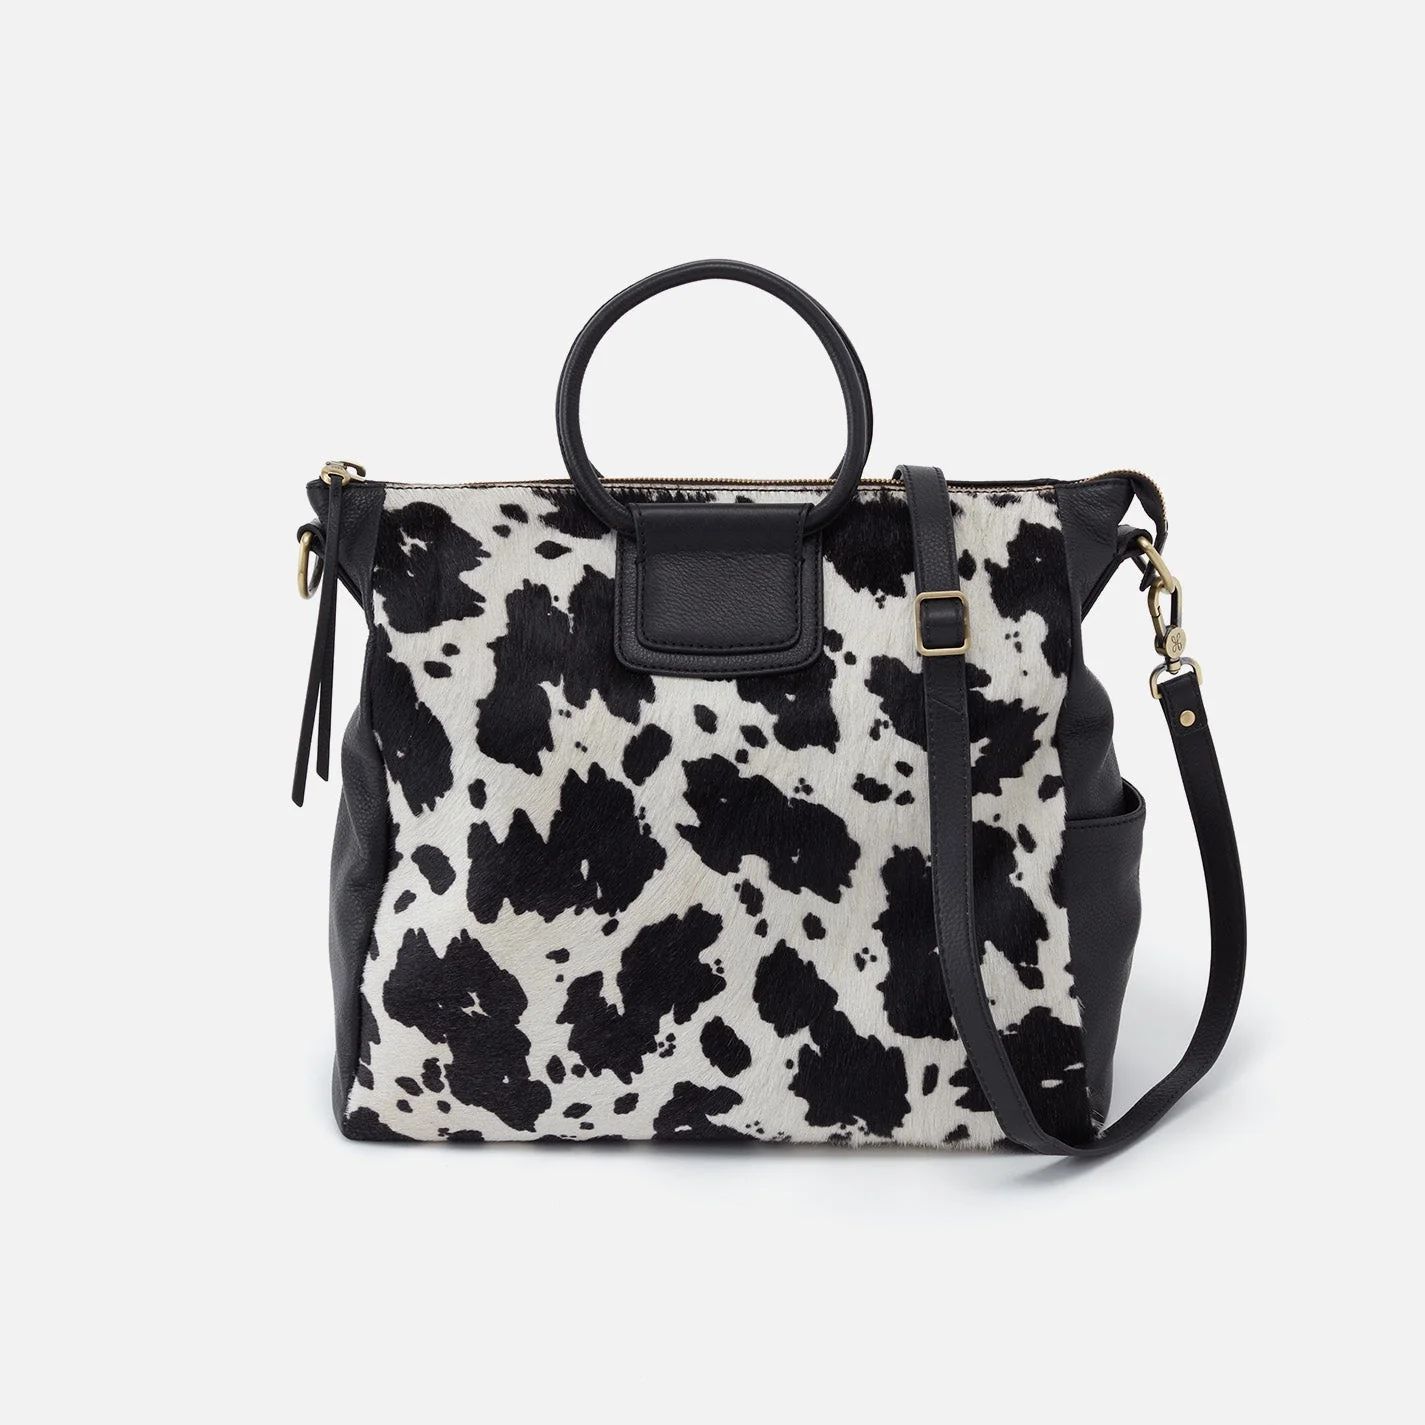 Sheila Large Satchel in Hair-On Leather - Cow Print Black And White | HOBO Bags